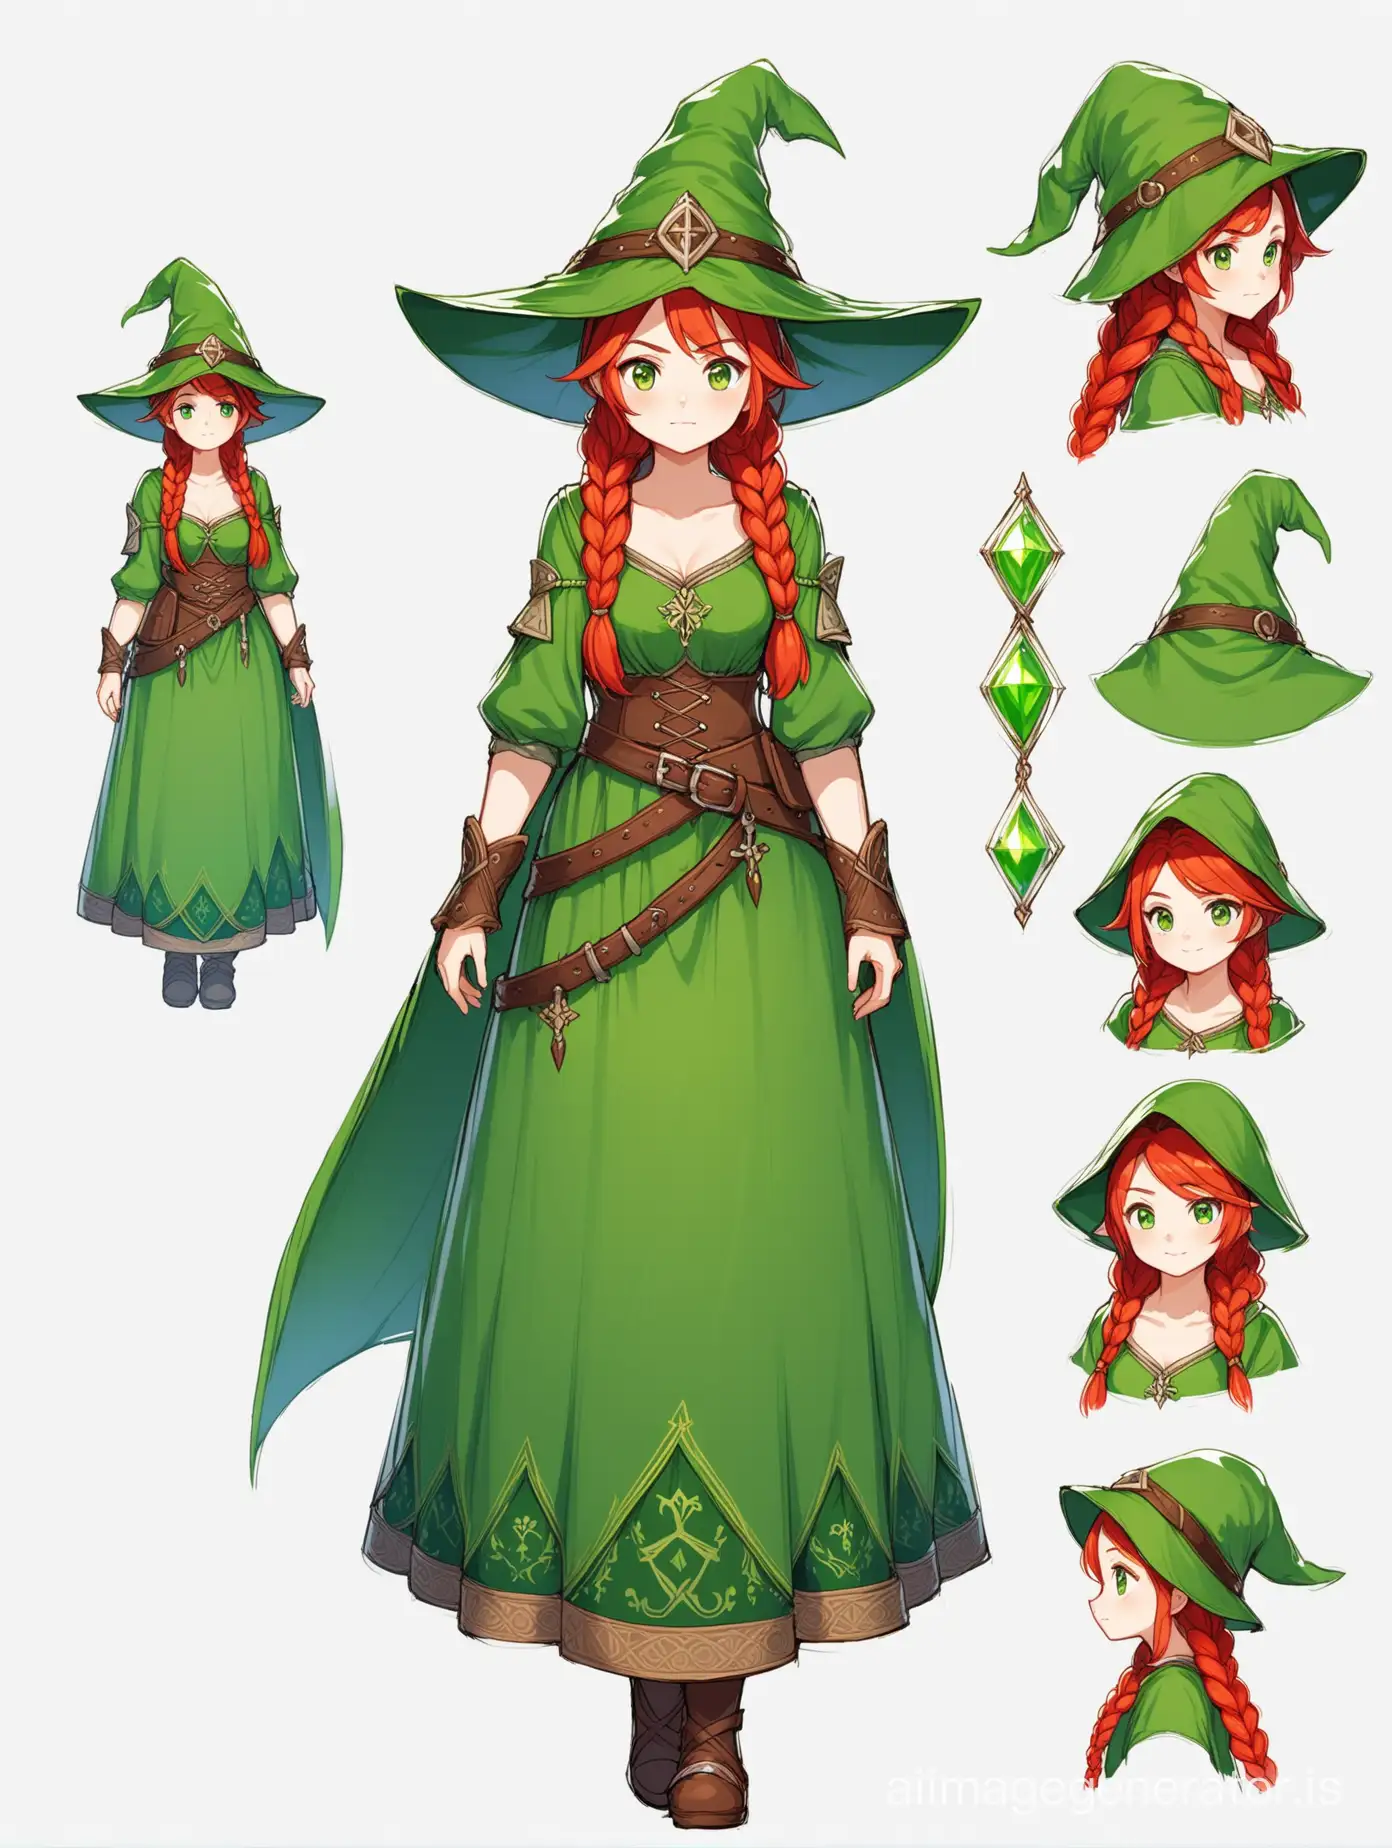 white background, 2D anime style, top-quality, character design, concept art, 1girl, fluffy red two braids, green eyes, fantasy medieval, fullbody, Slavic dress, green witch hat, skirt, genshin character, boyish features